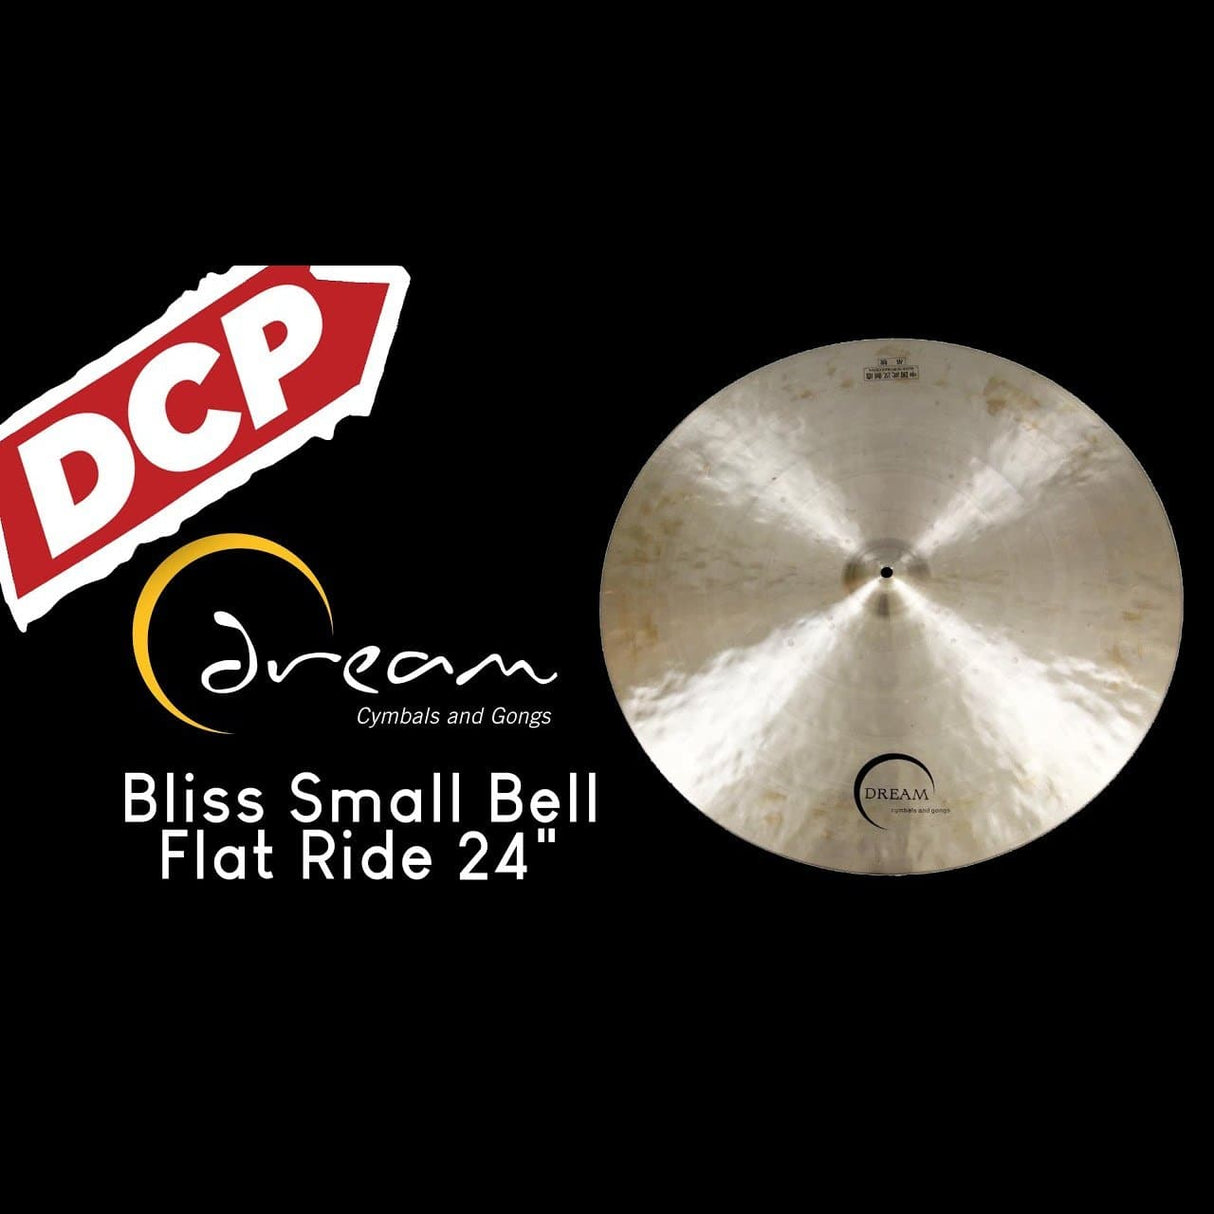 Dream Bliss Small Bell Flat Ride Cymbal 24" 3068 grams